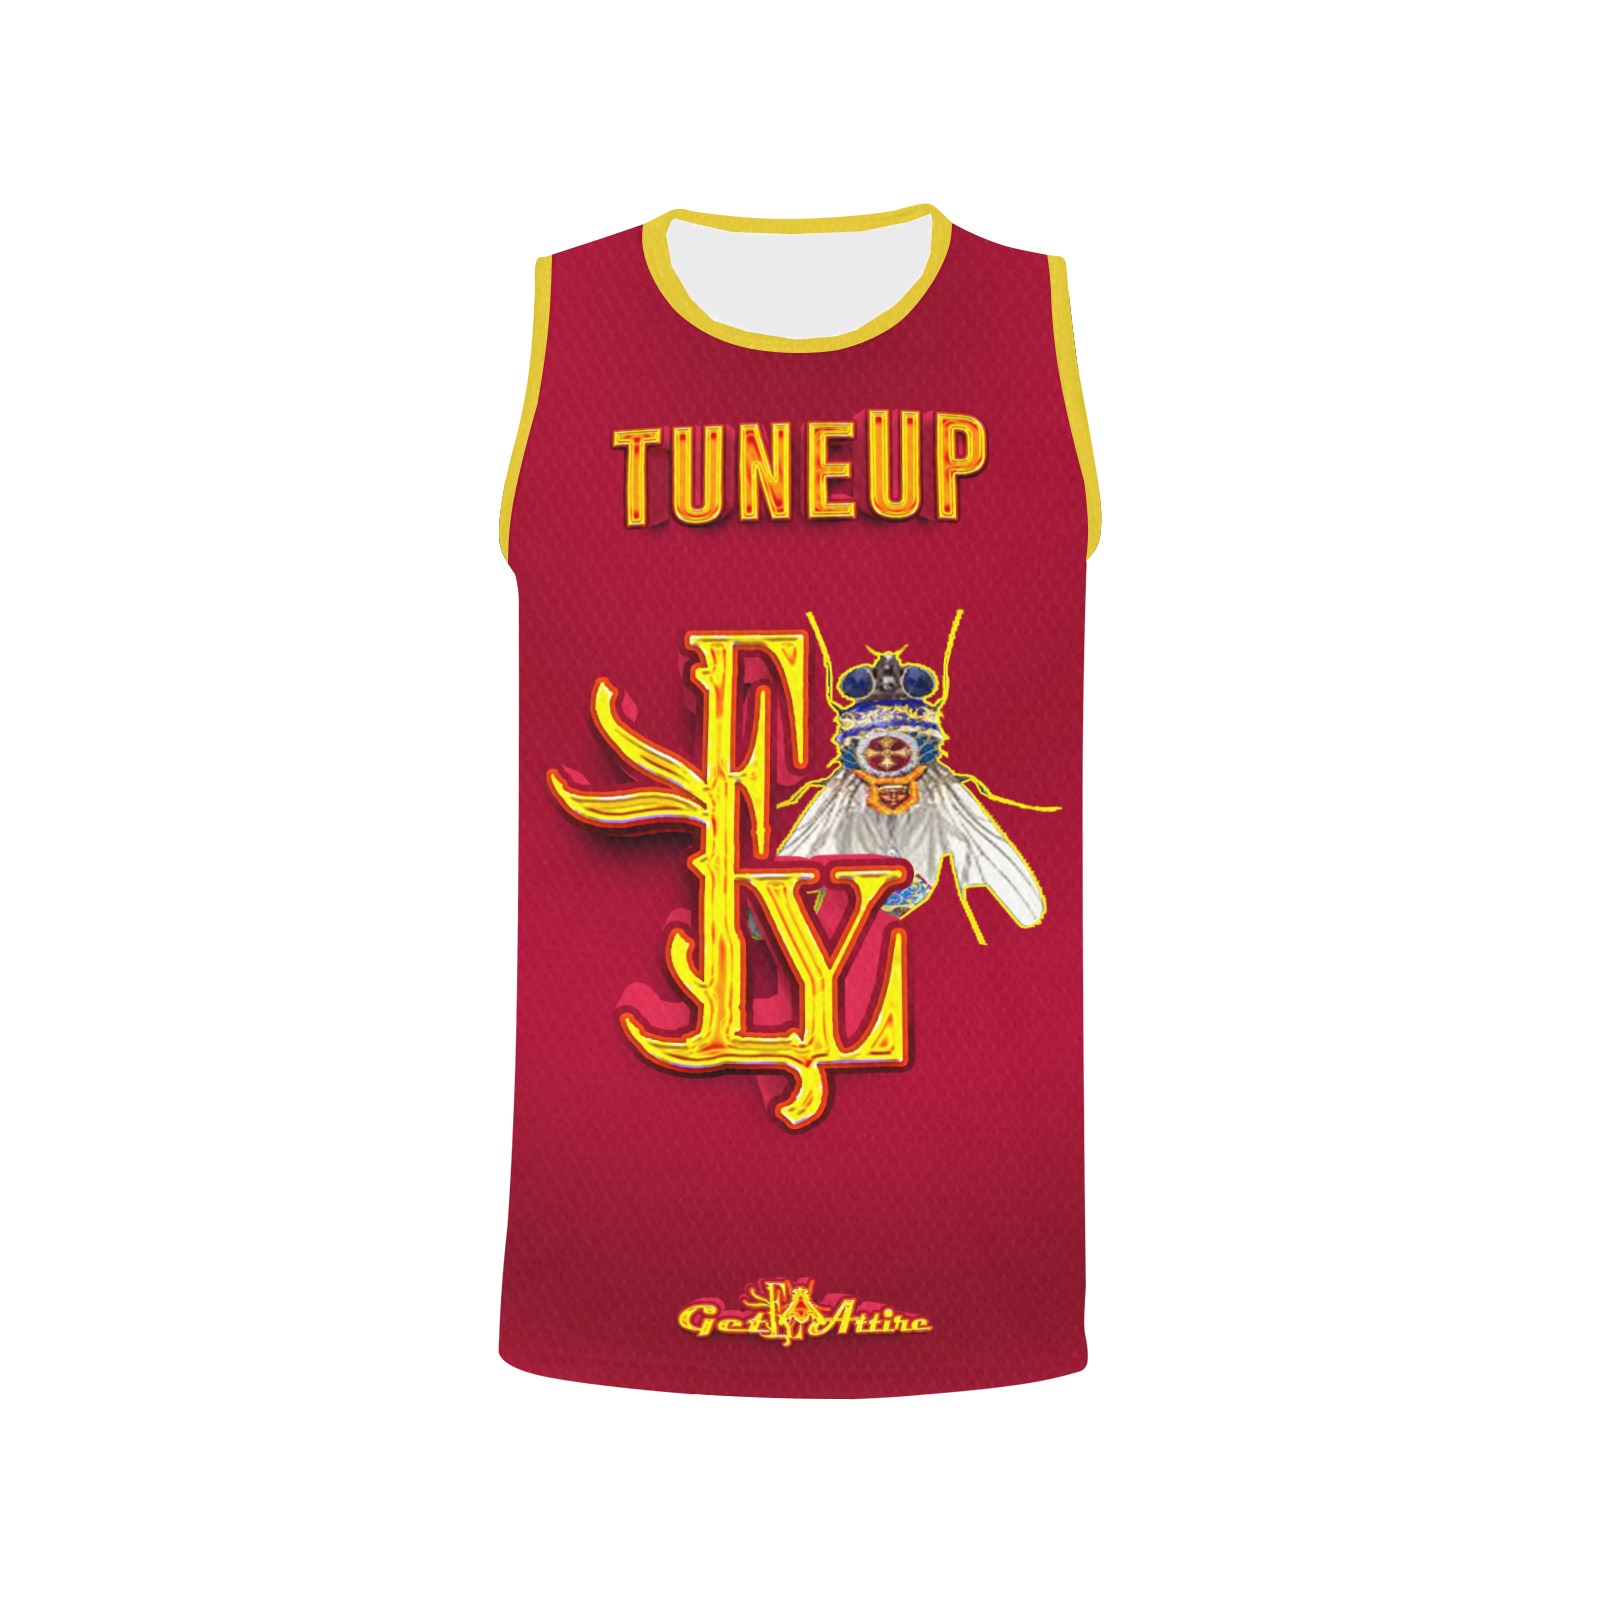 Tune Up Collectable Fly All Over Print Basketball Jersey